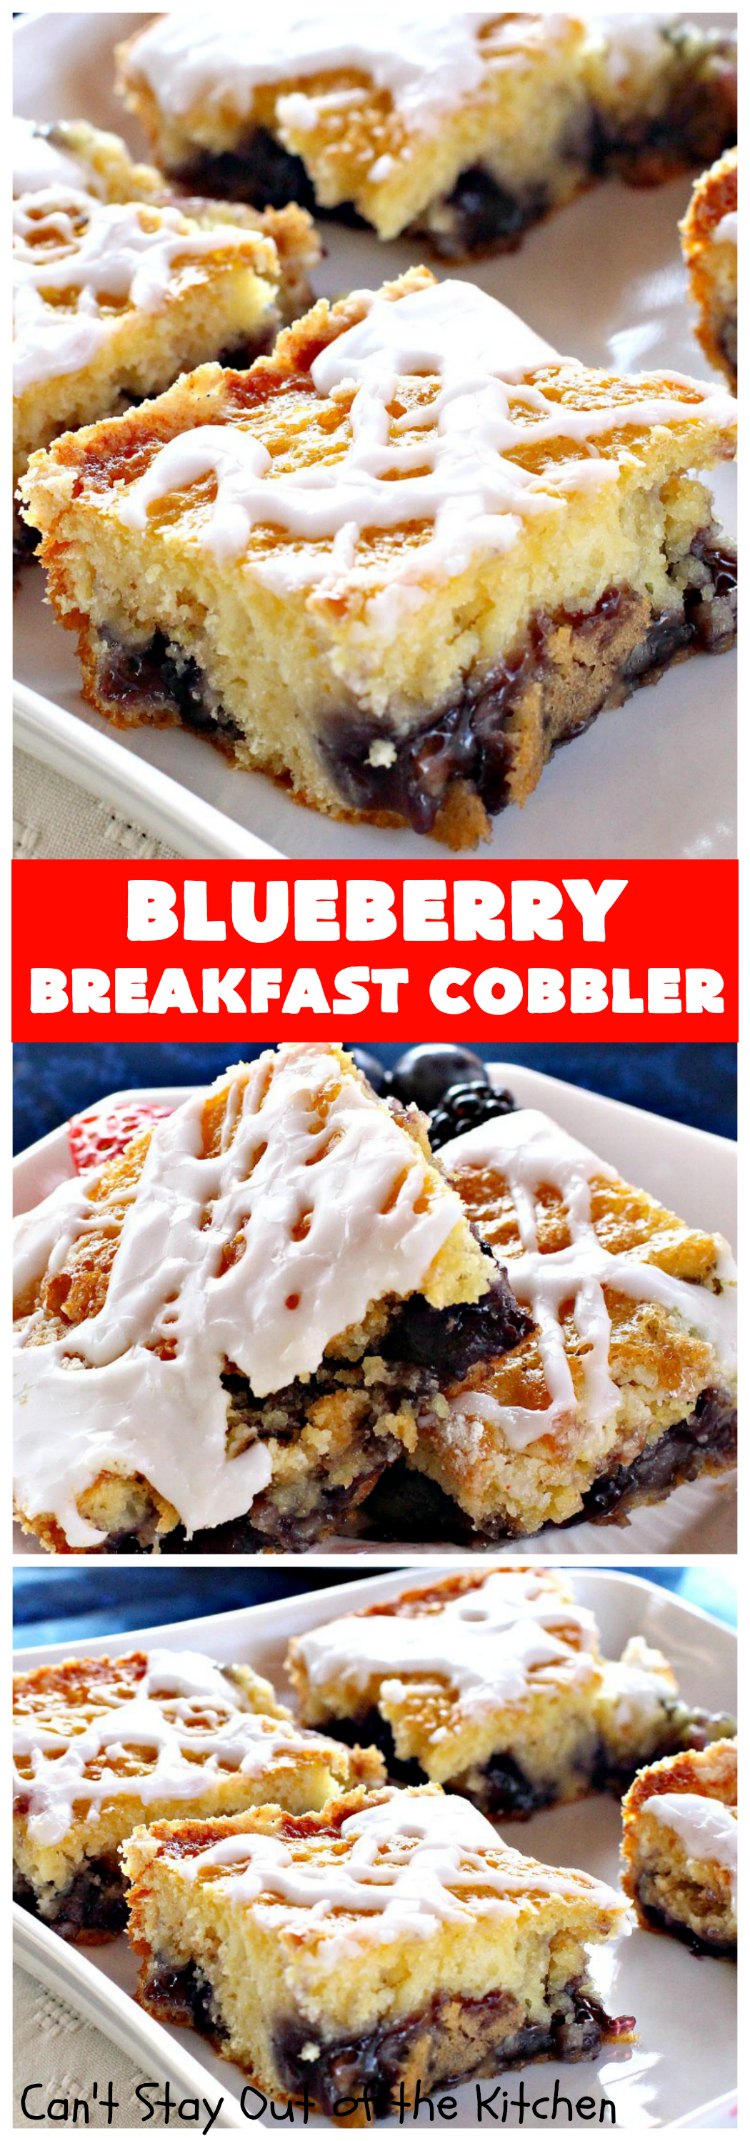 Blueberry Breakfast Cobbler | Can't Stay Out of the KitchenBlueberry Breakfast Cobbler | Can't Stay Out of the Kitchen